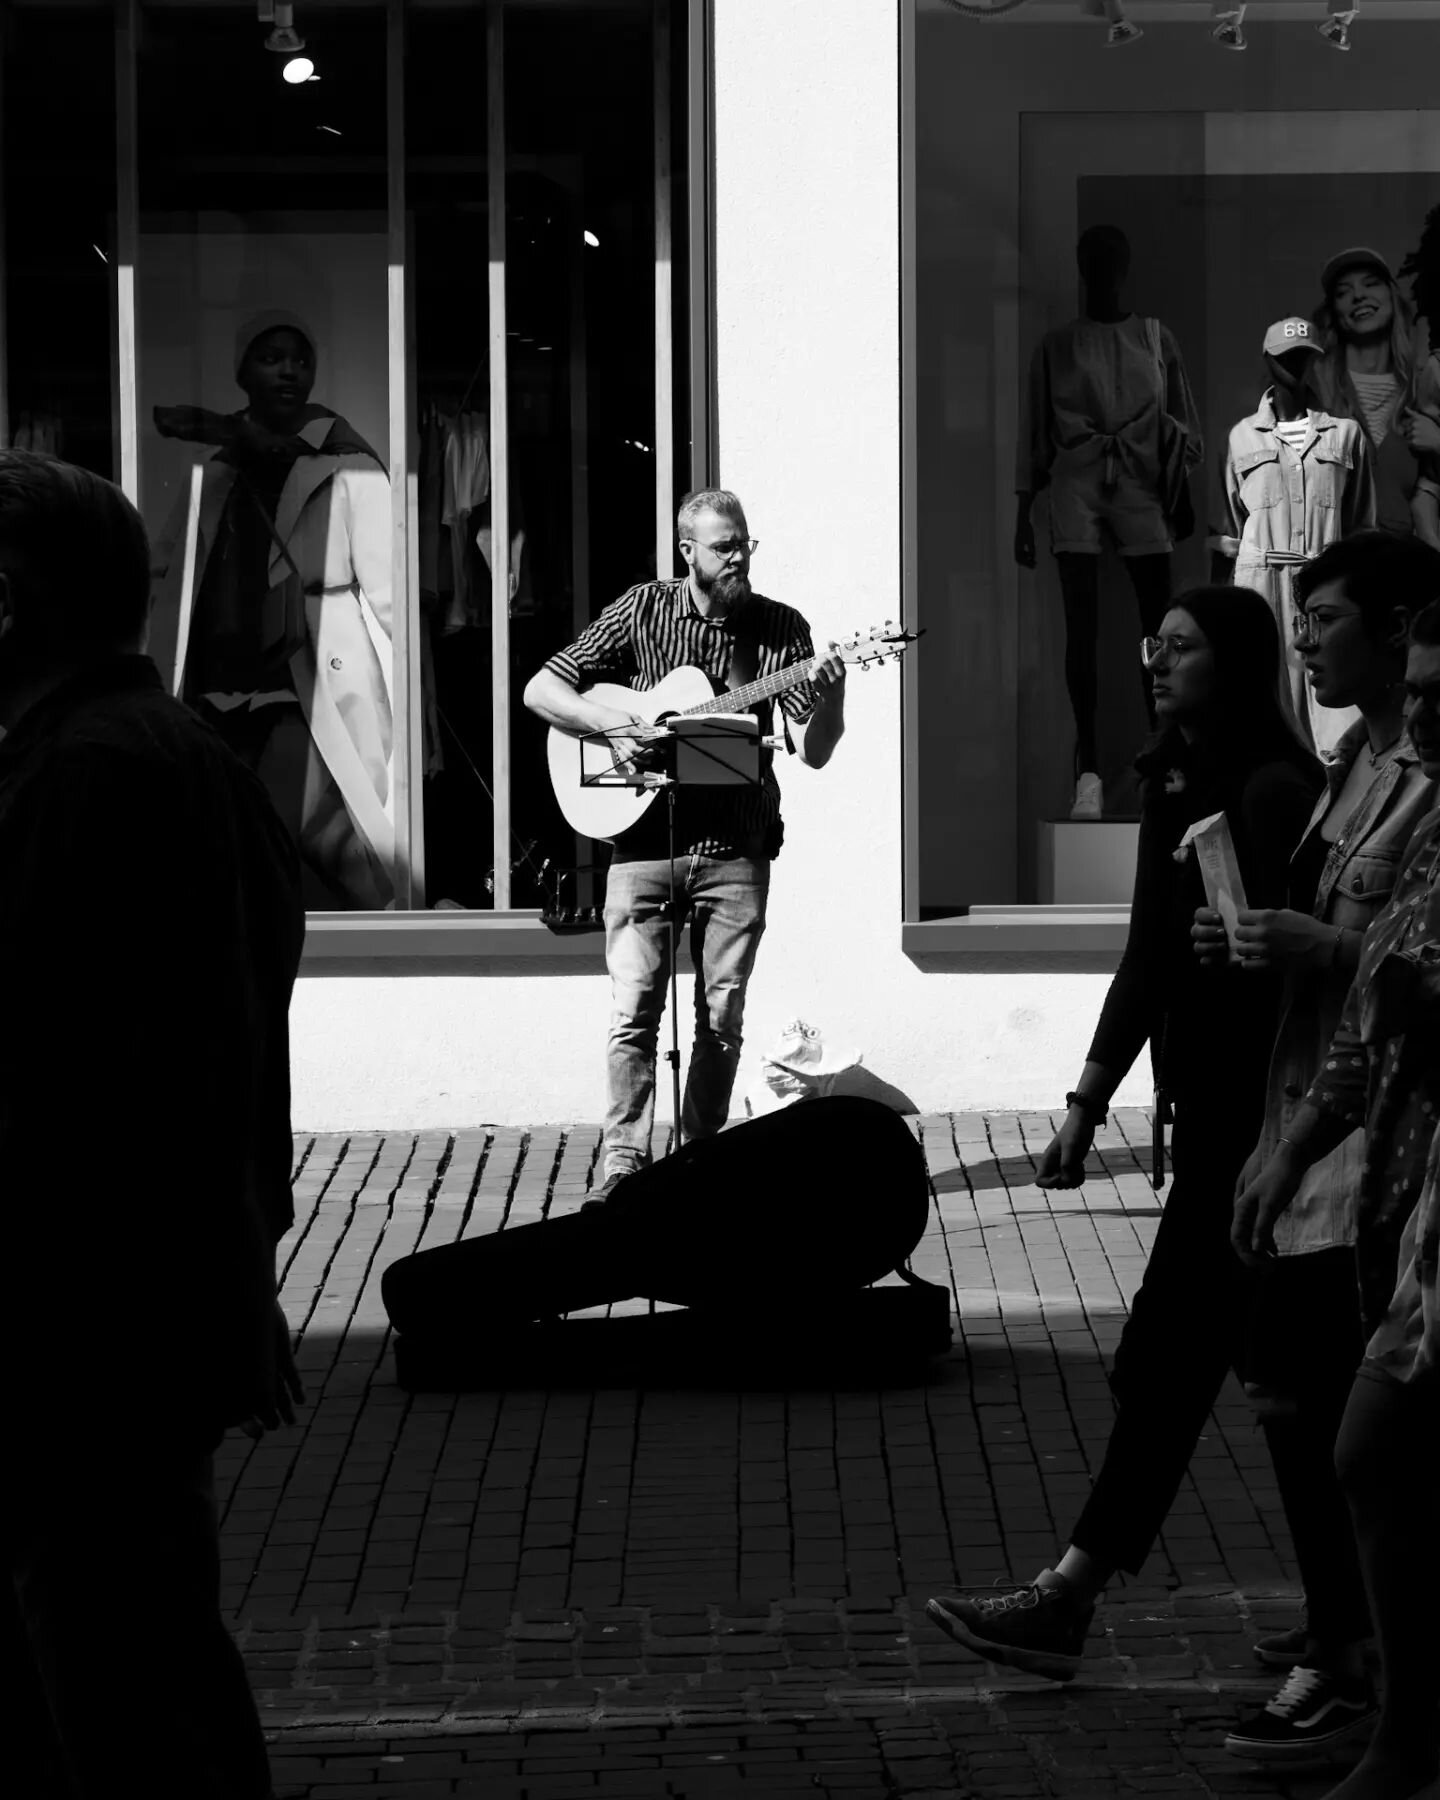 If nothing works...
...music does! 

Share your passion. 

Thanks @david_bildhauer 

#_streetstock #cinema_streets #streetxstory #streetmoment #streetphotographyinternational #streetcollective #streetphotography #soulofstreet #olympusphotography  #st